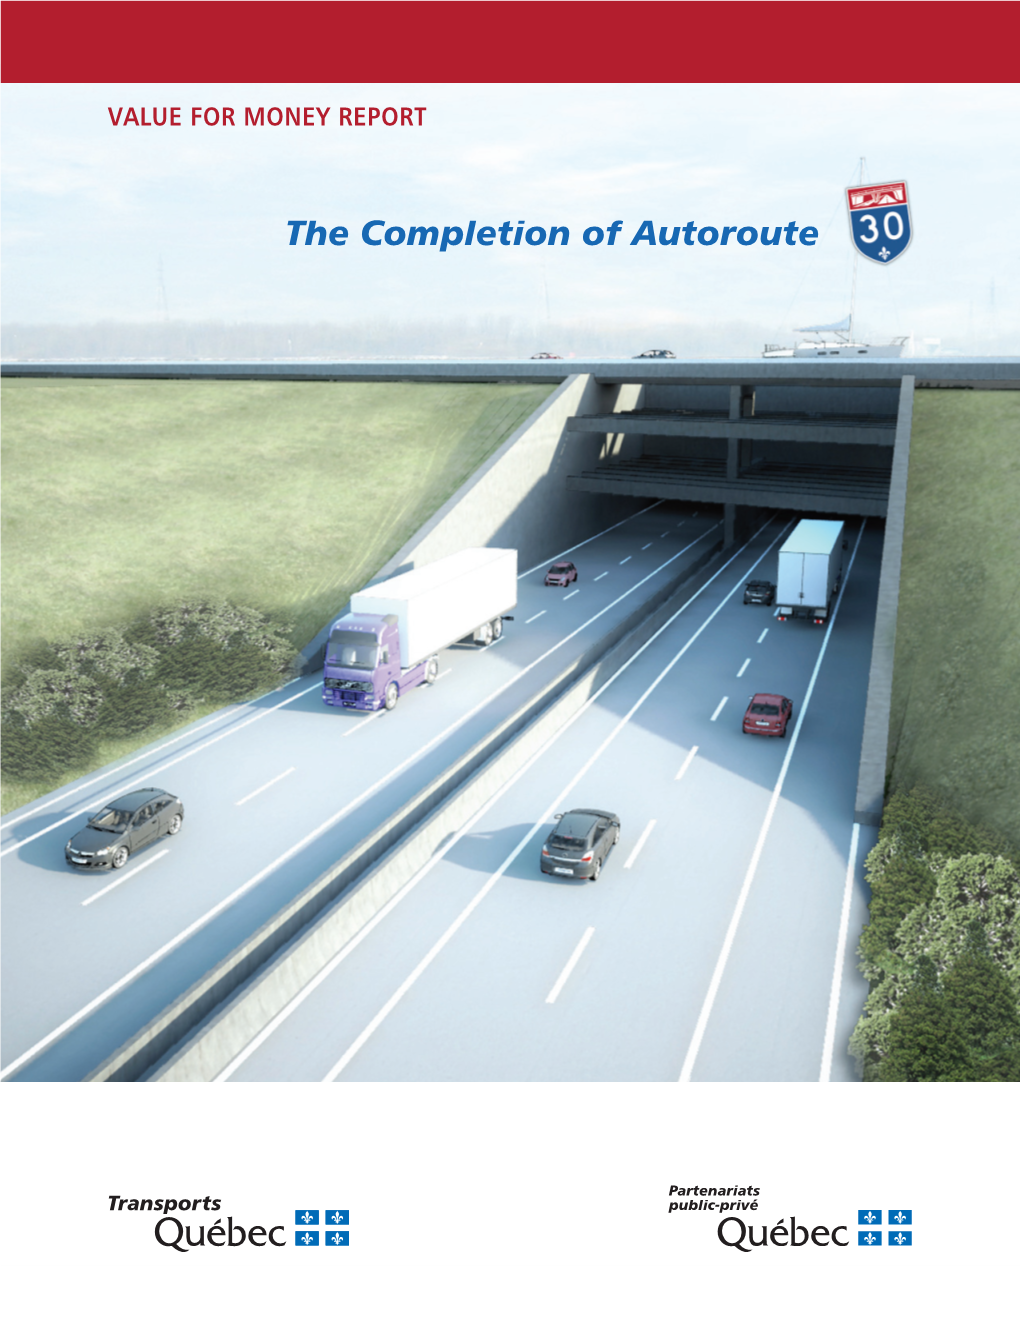 The Completion of Autoroute